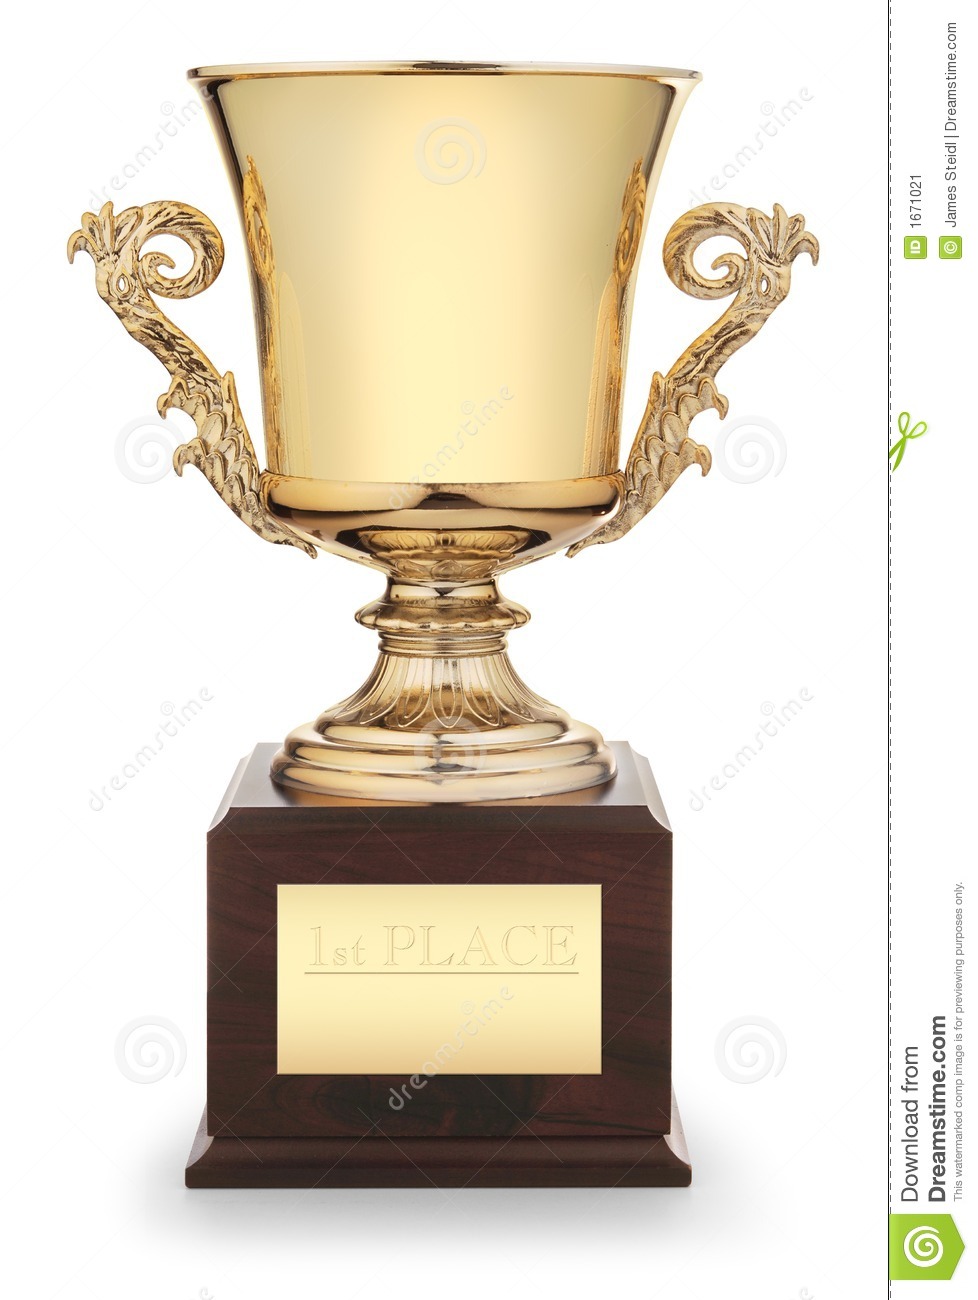 Gold Trophy Cup On Wood Pedestal With Engraved Inscription 1st Place